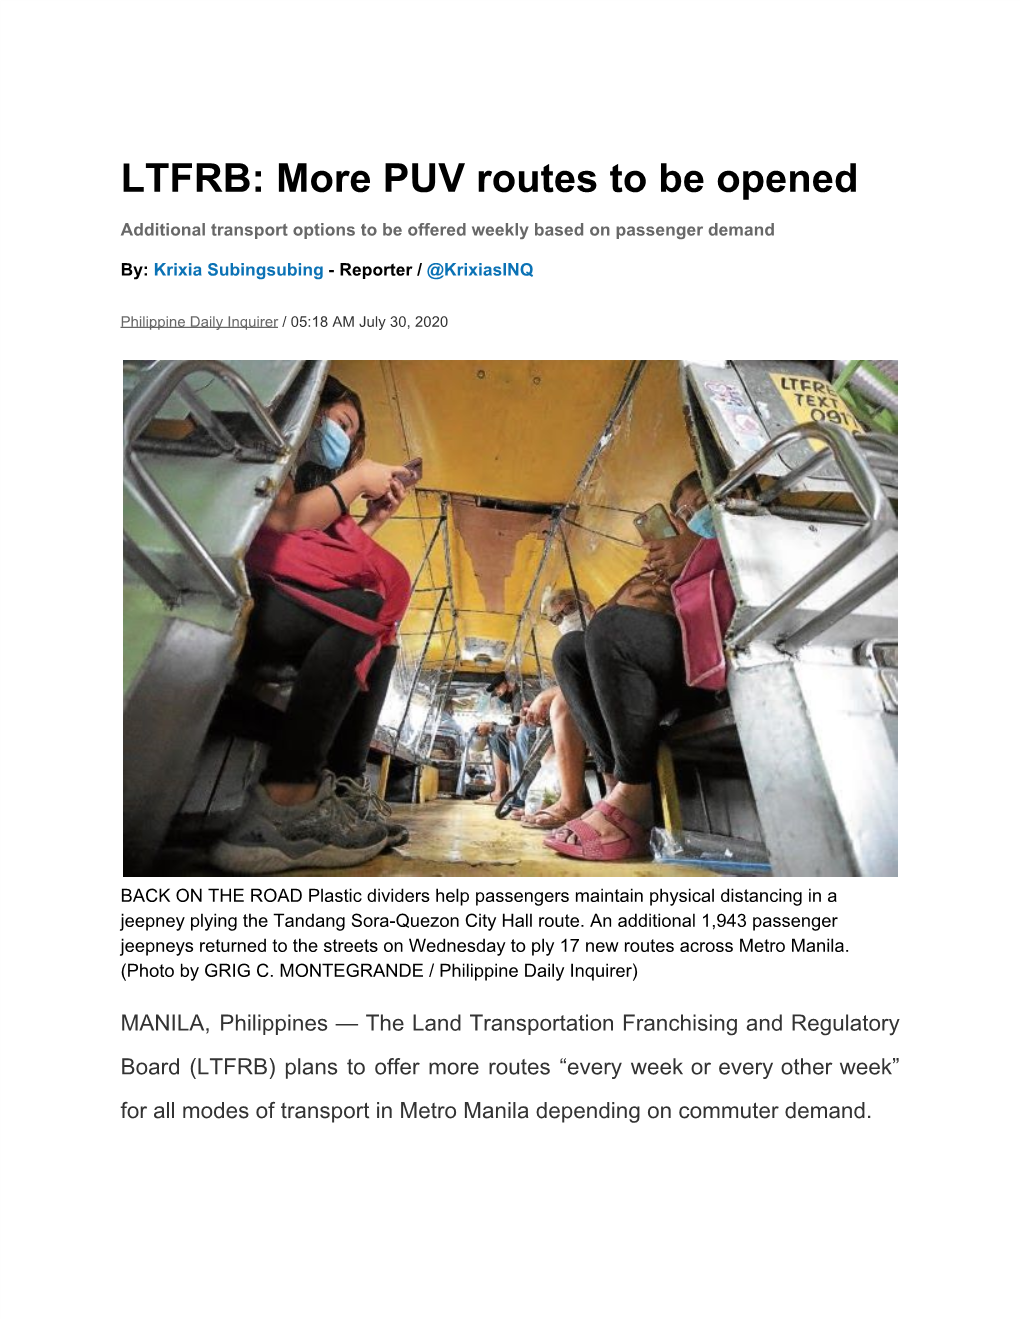 LTFRB: More PUV Routes to Be Opened